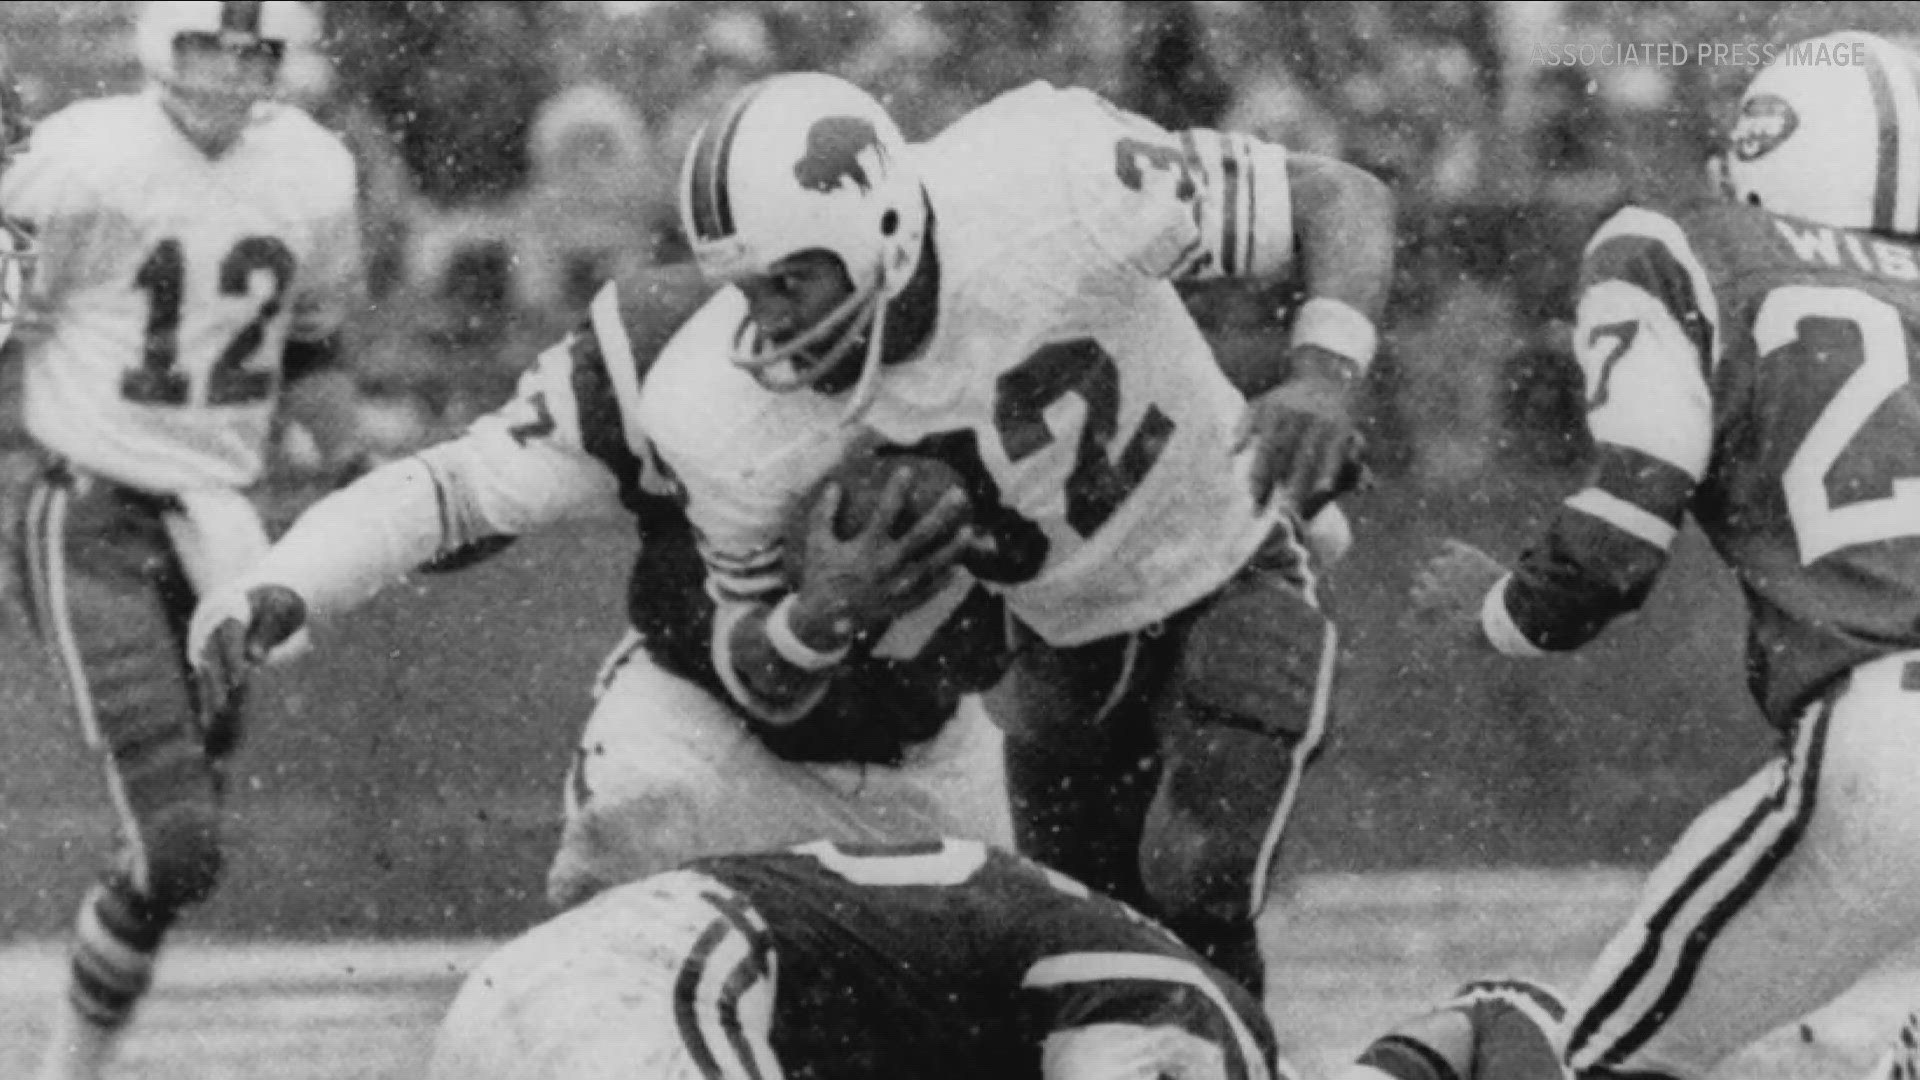 Simpson was drafted by the Bills in 1969.